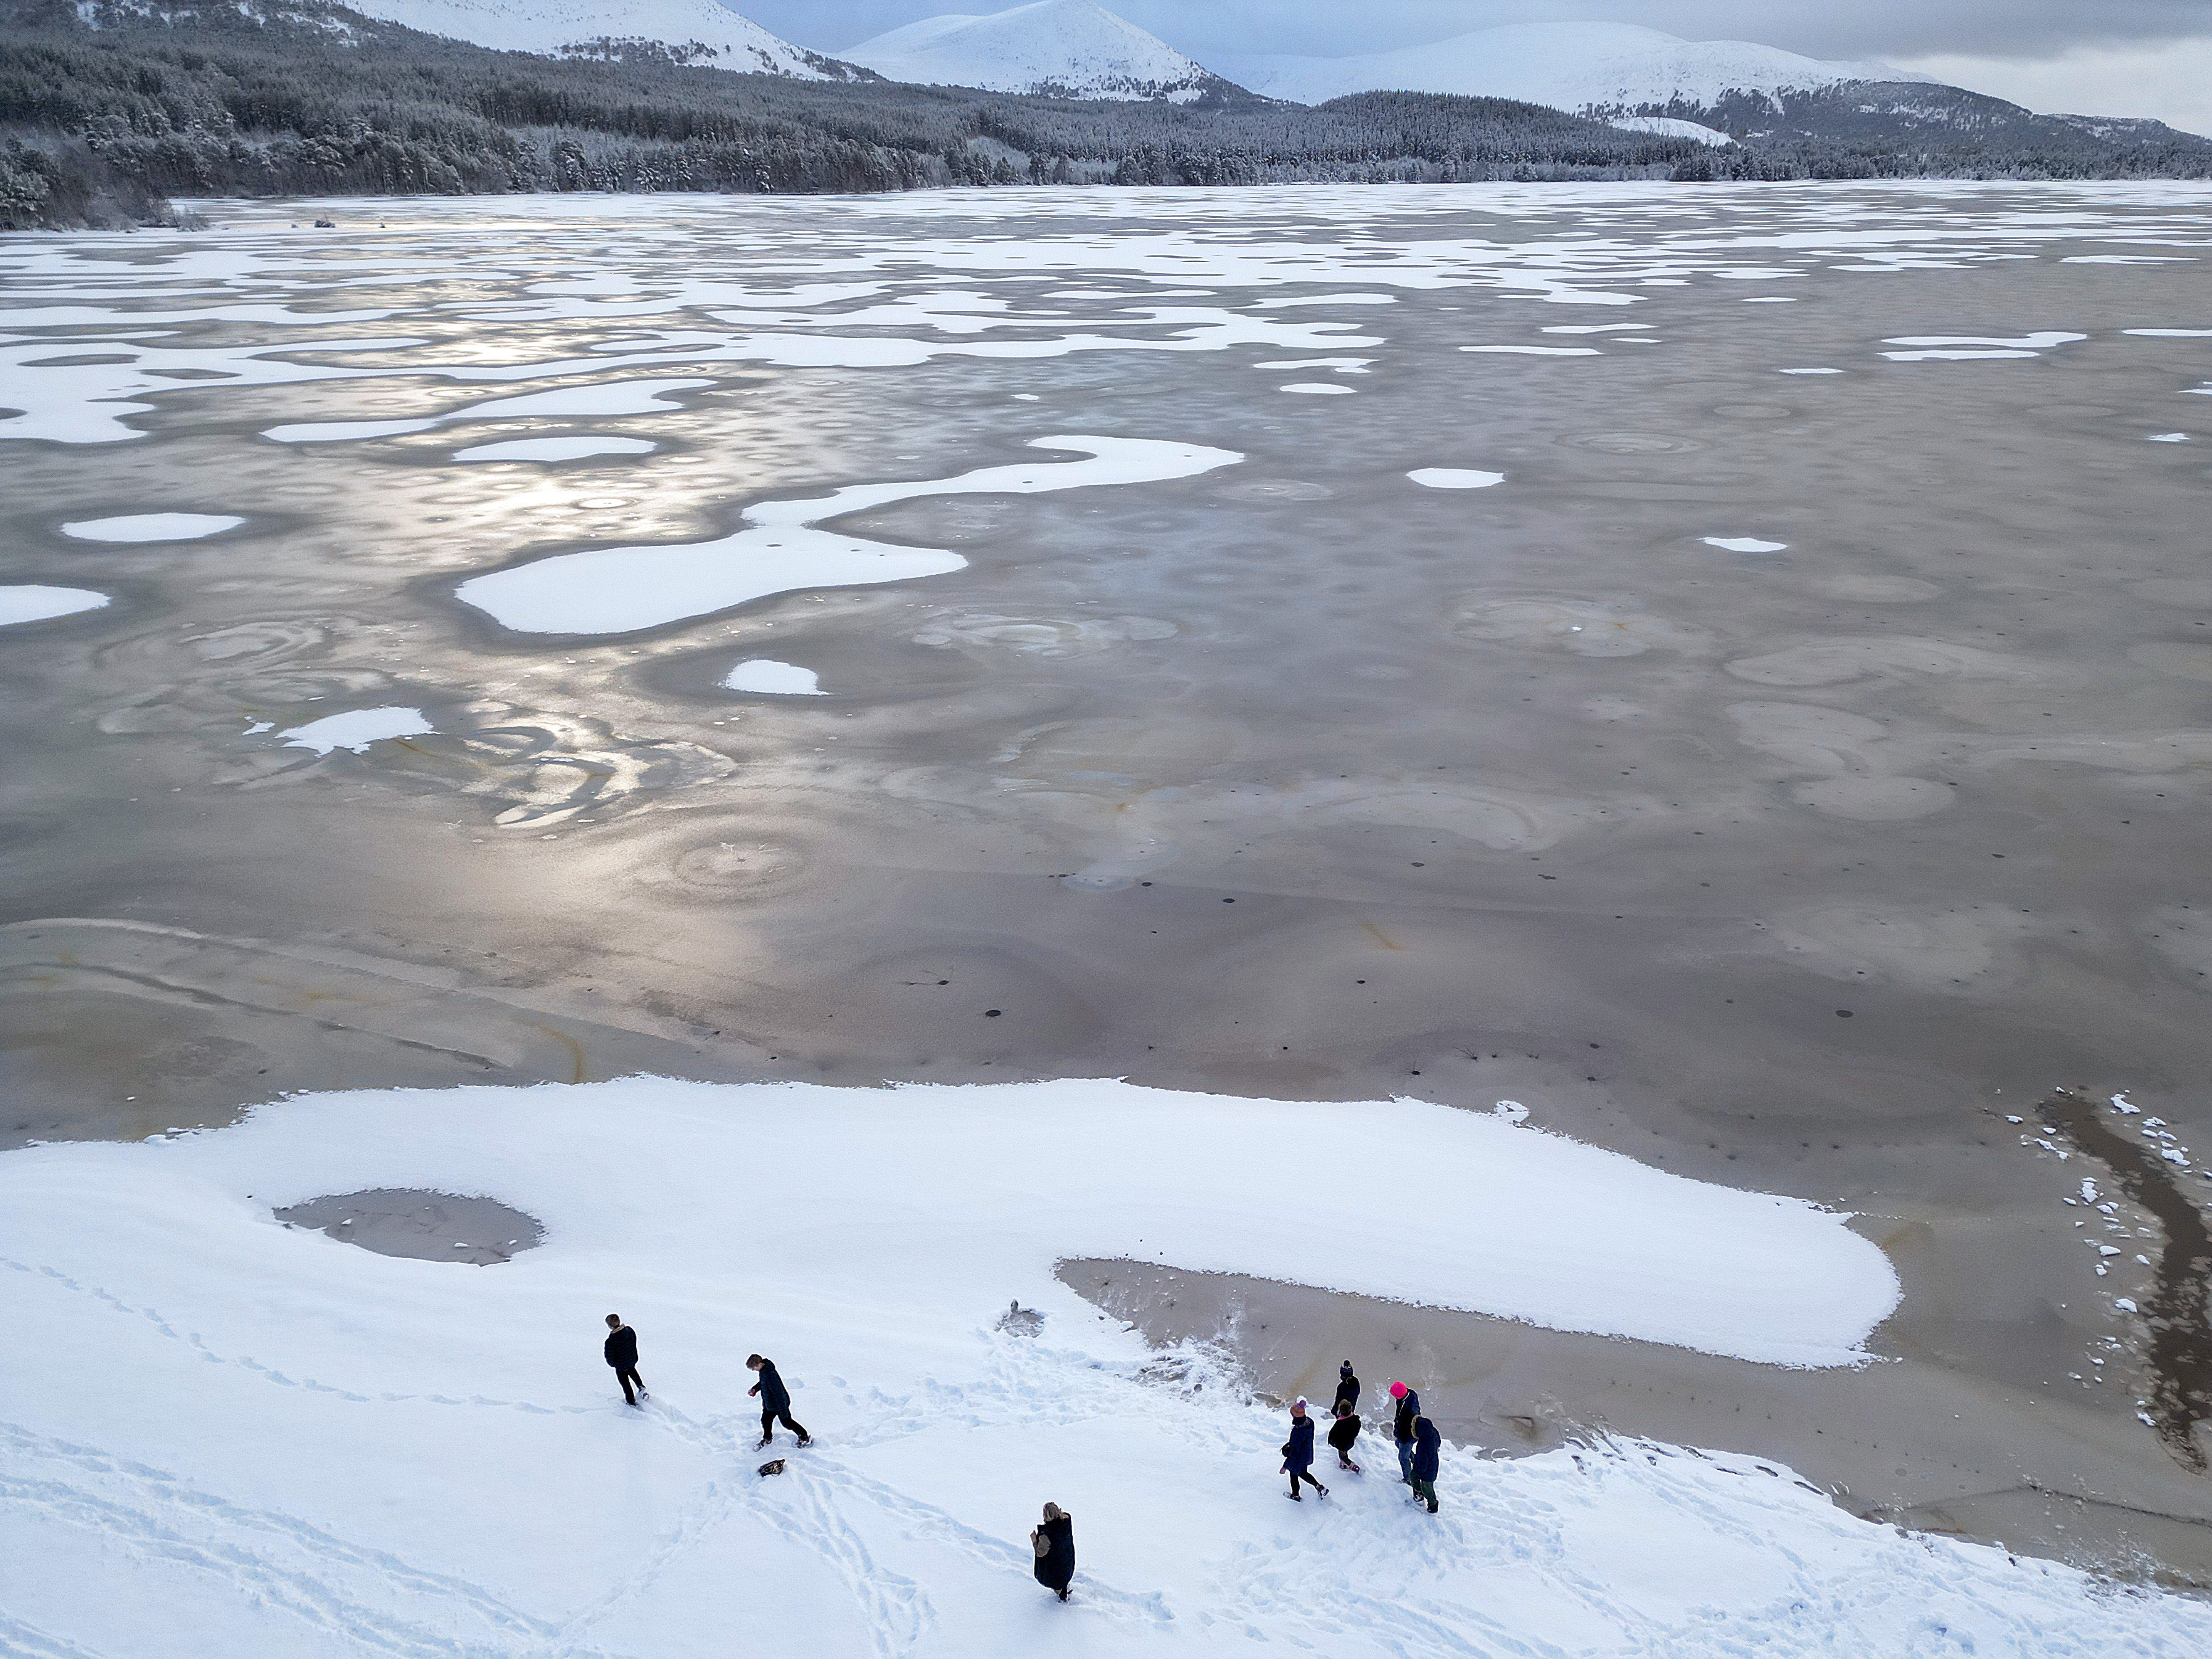 Loch Morlich in the Scottish Highlands was frozen over on Wednesday, ahead of the coldest night of 2023 so far